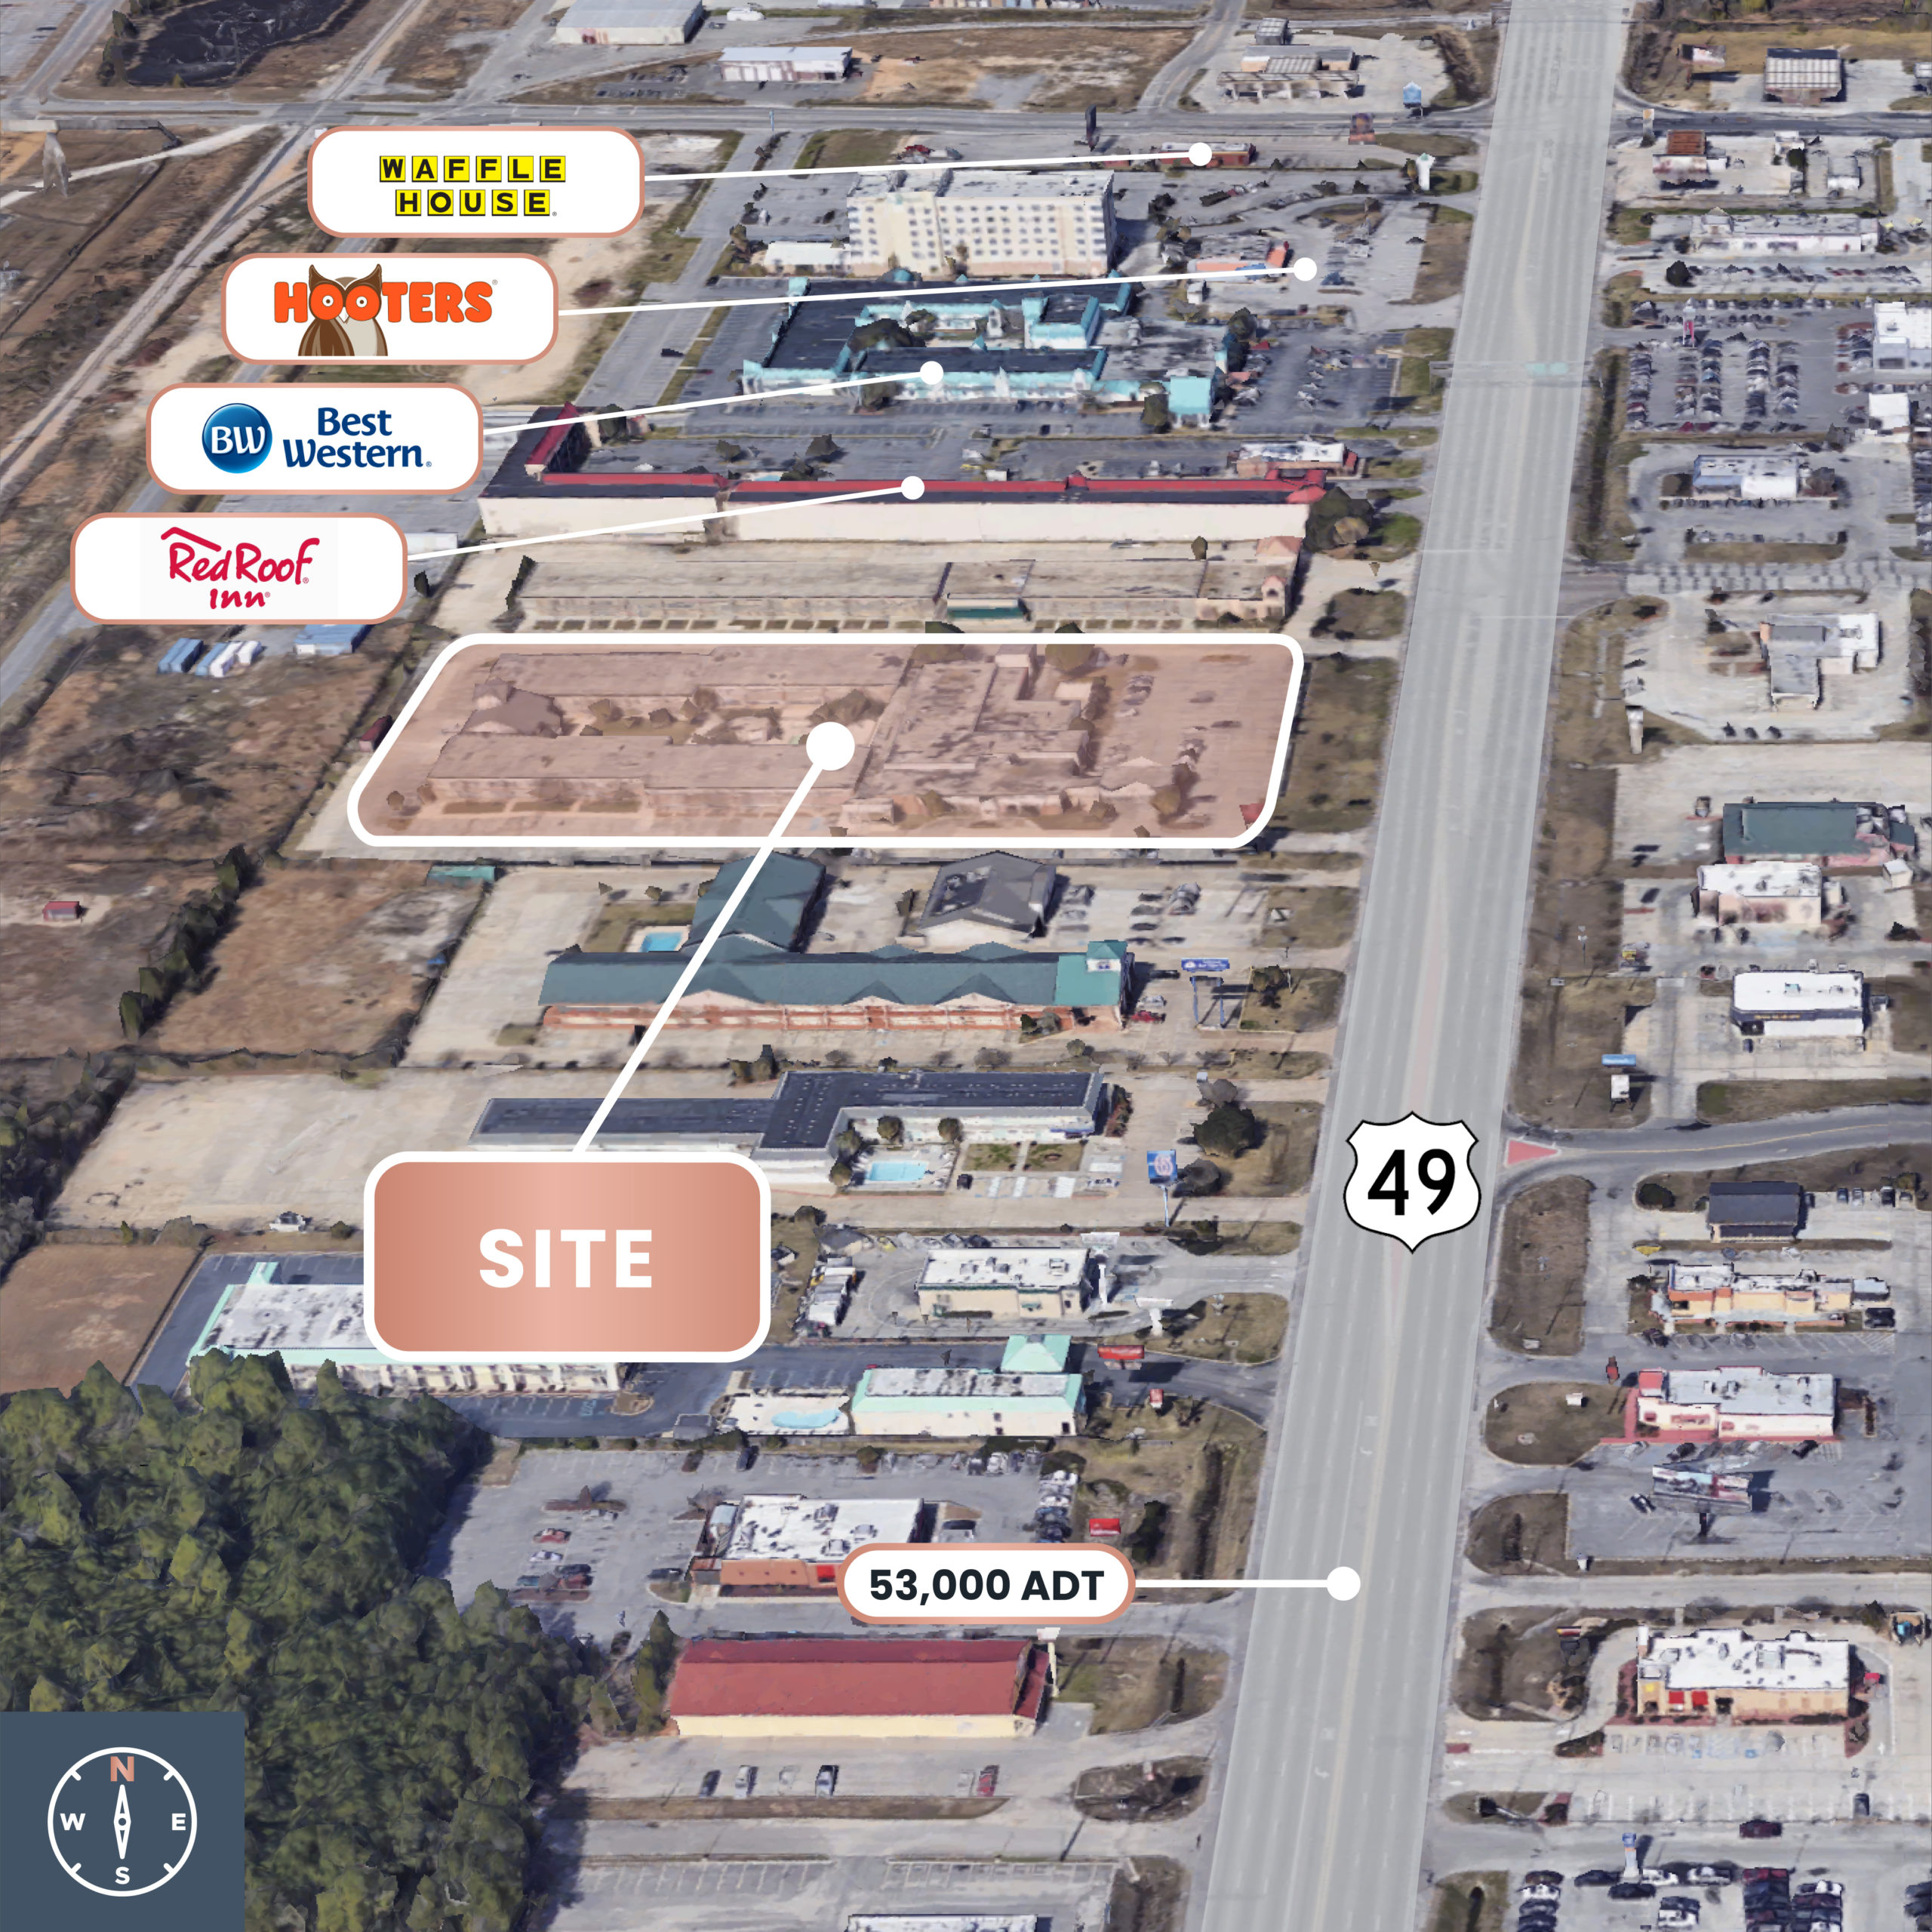 Position Your Business in Front of WalMart & New Hospitality Development on Hwy 49 & I-10